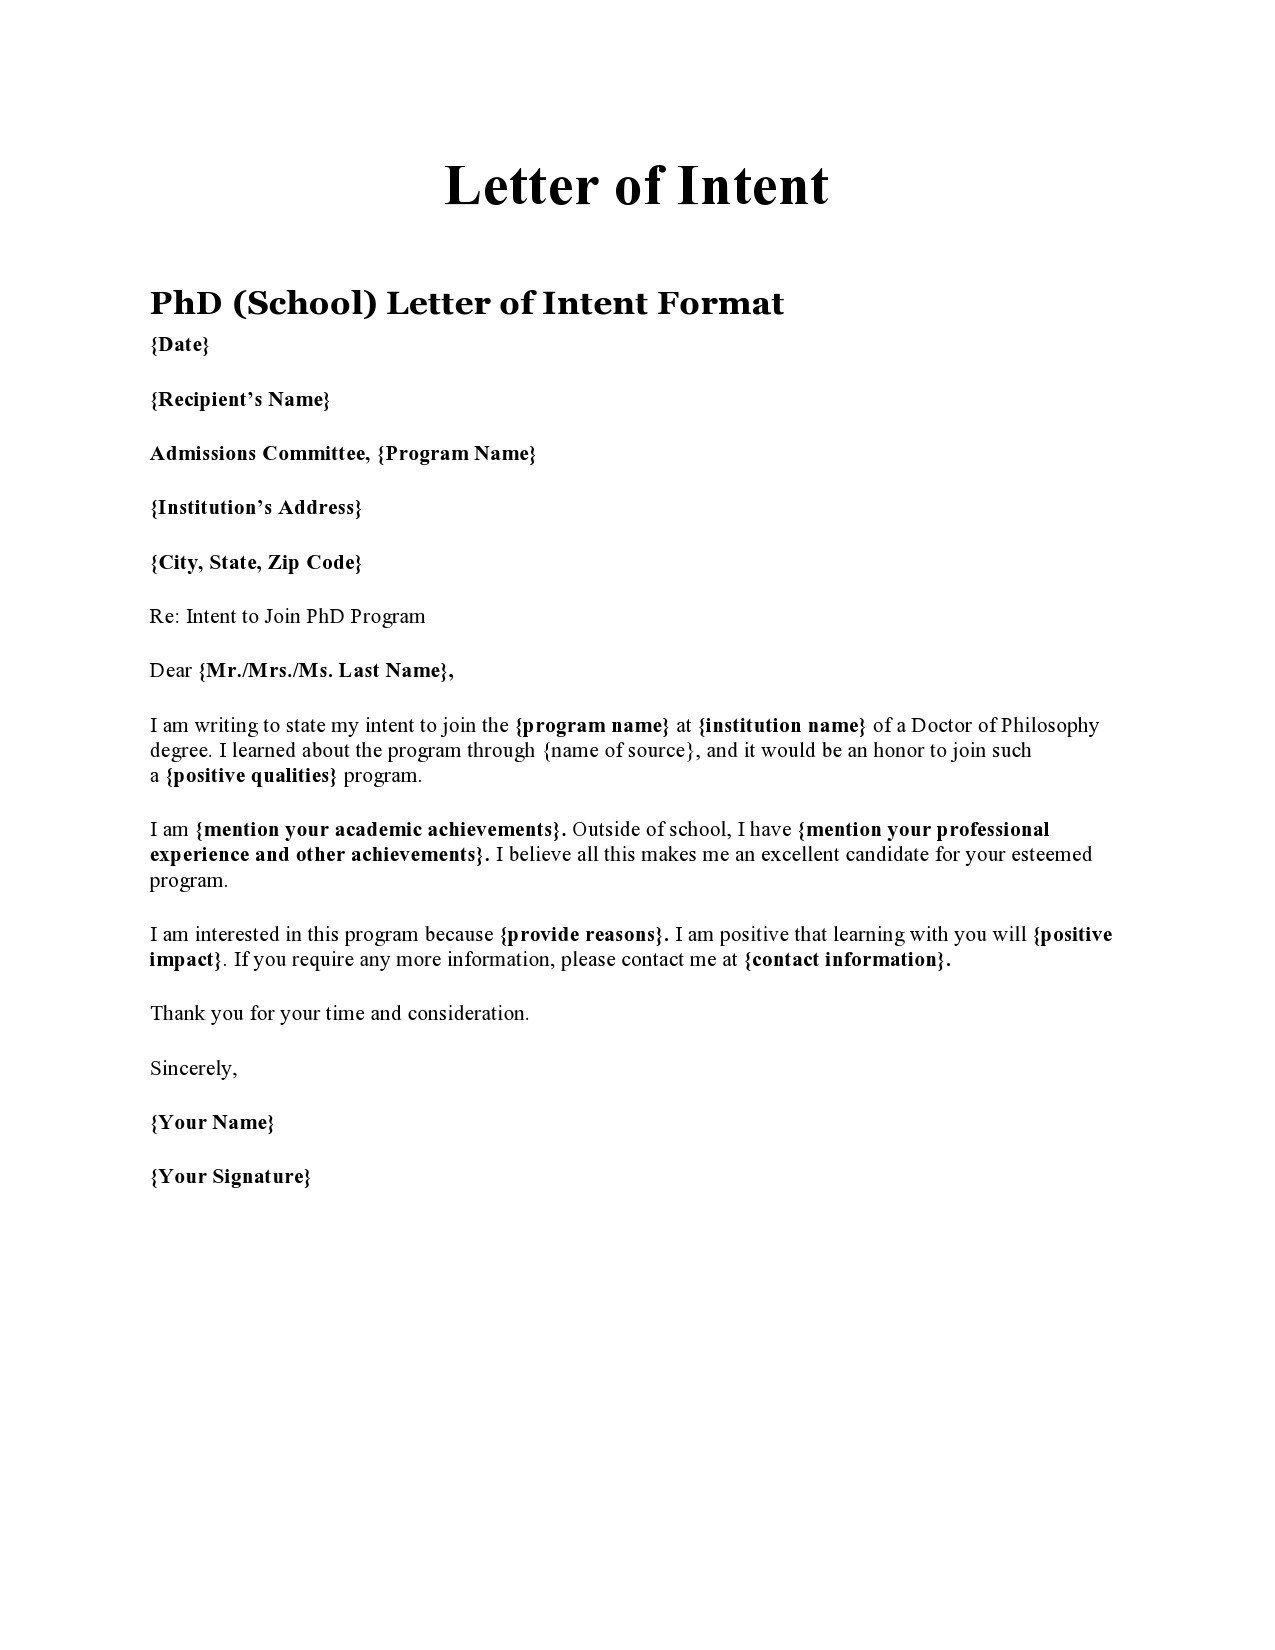 Free letter of intent for graduate school 01